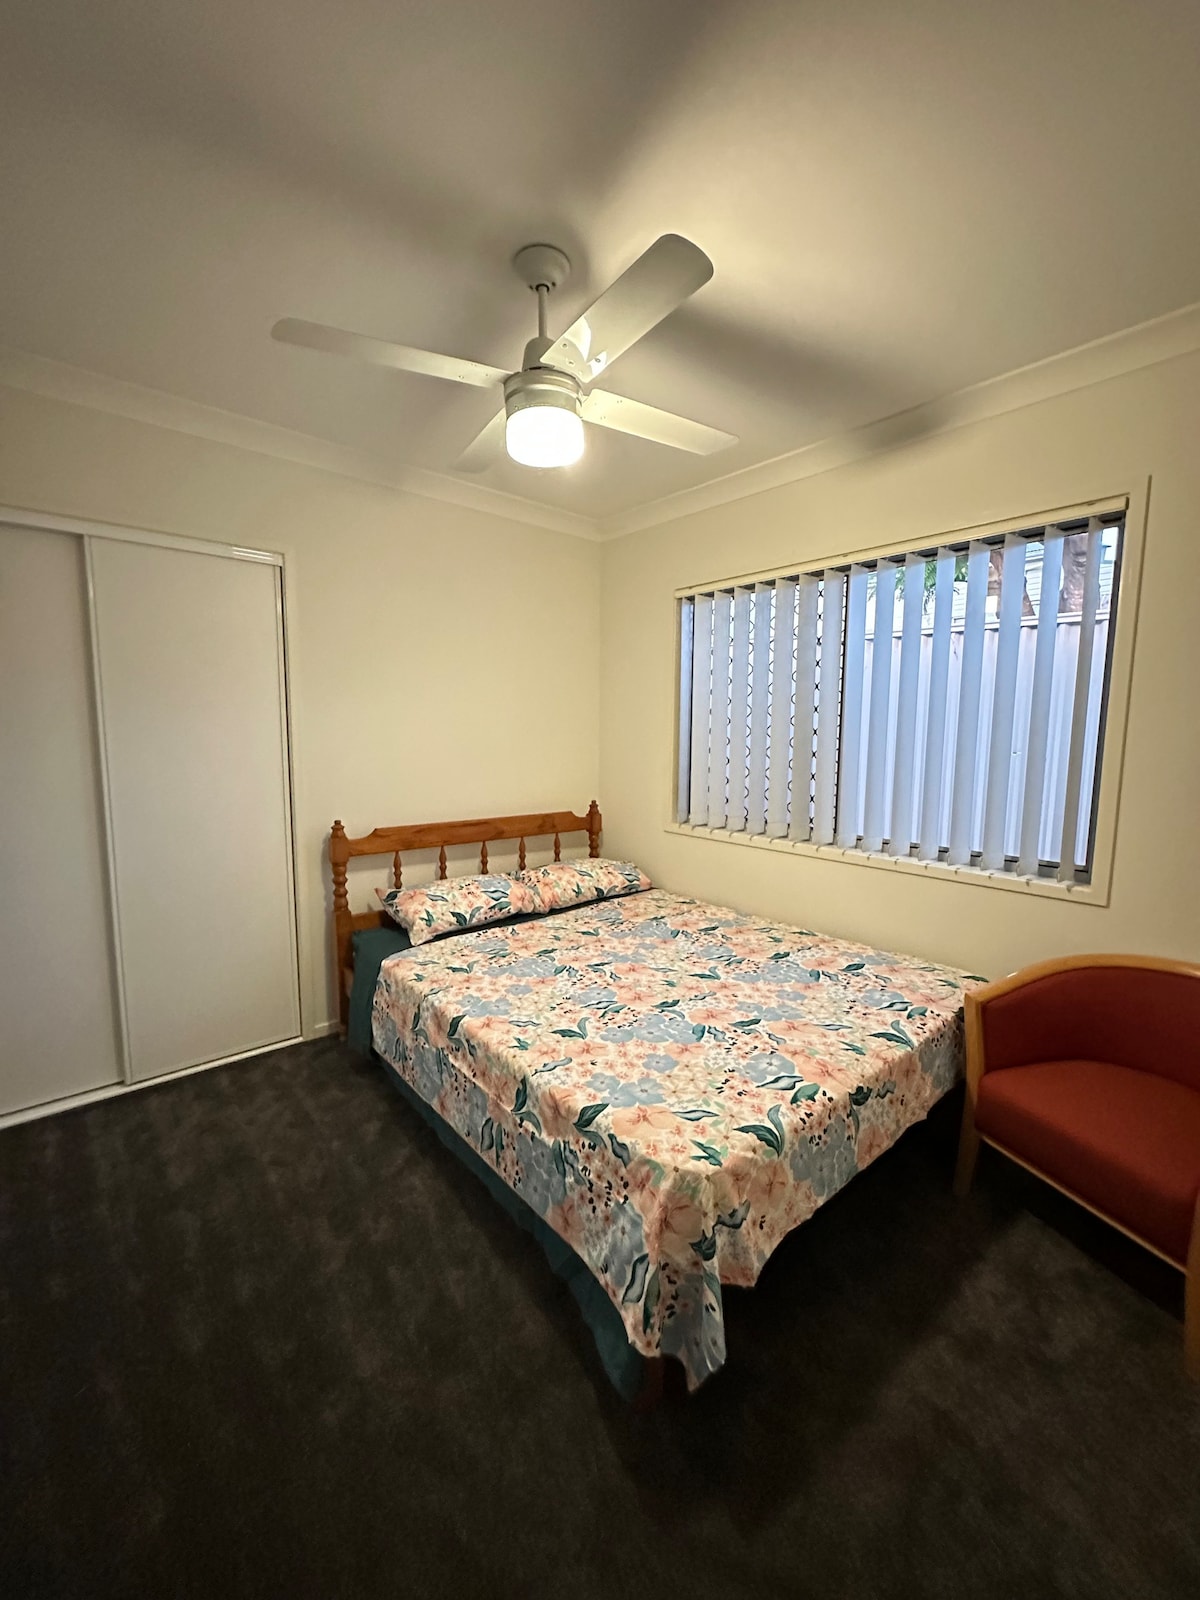 4 Bed Room Entire House CIose to Ipswich city